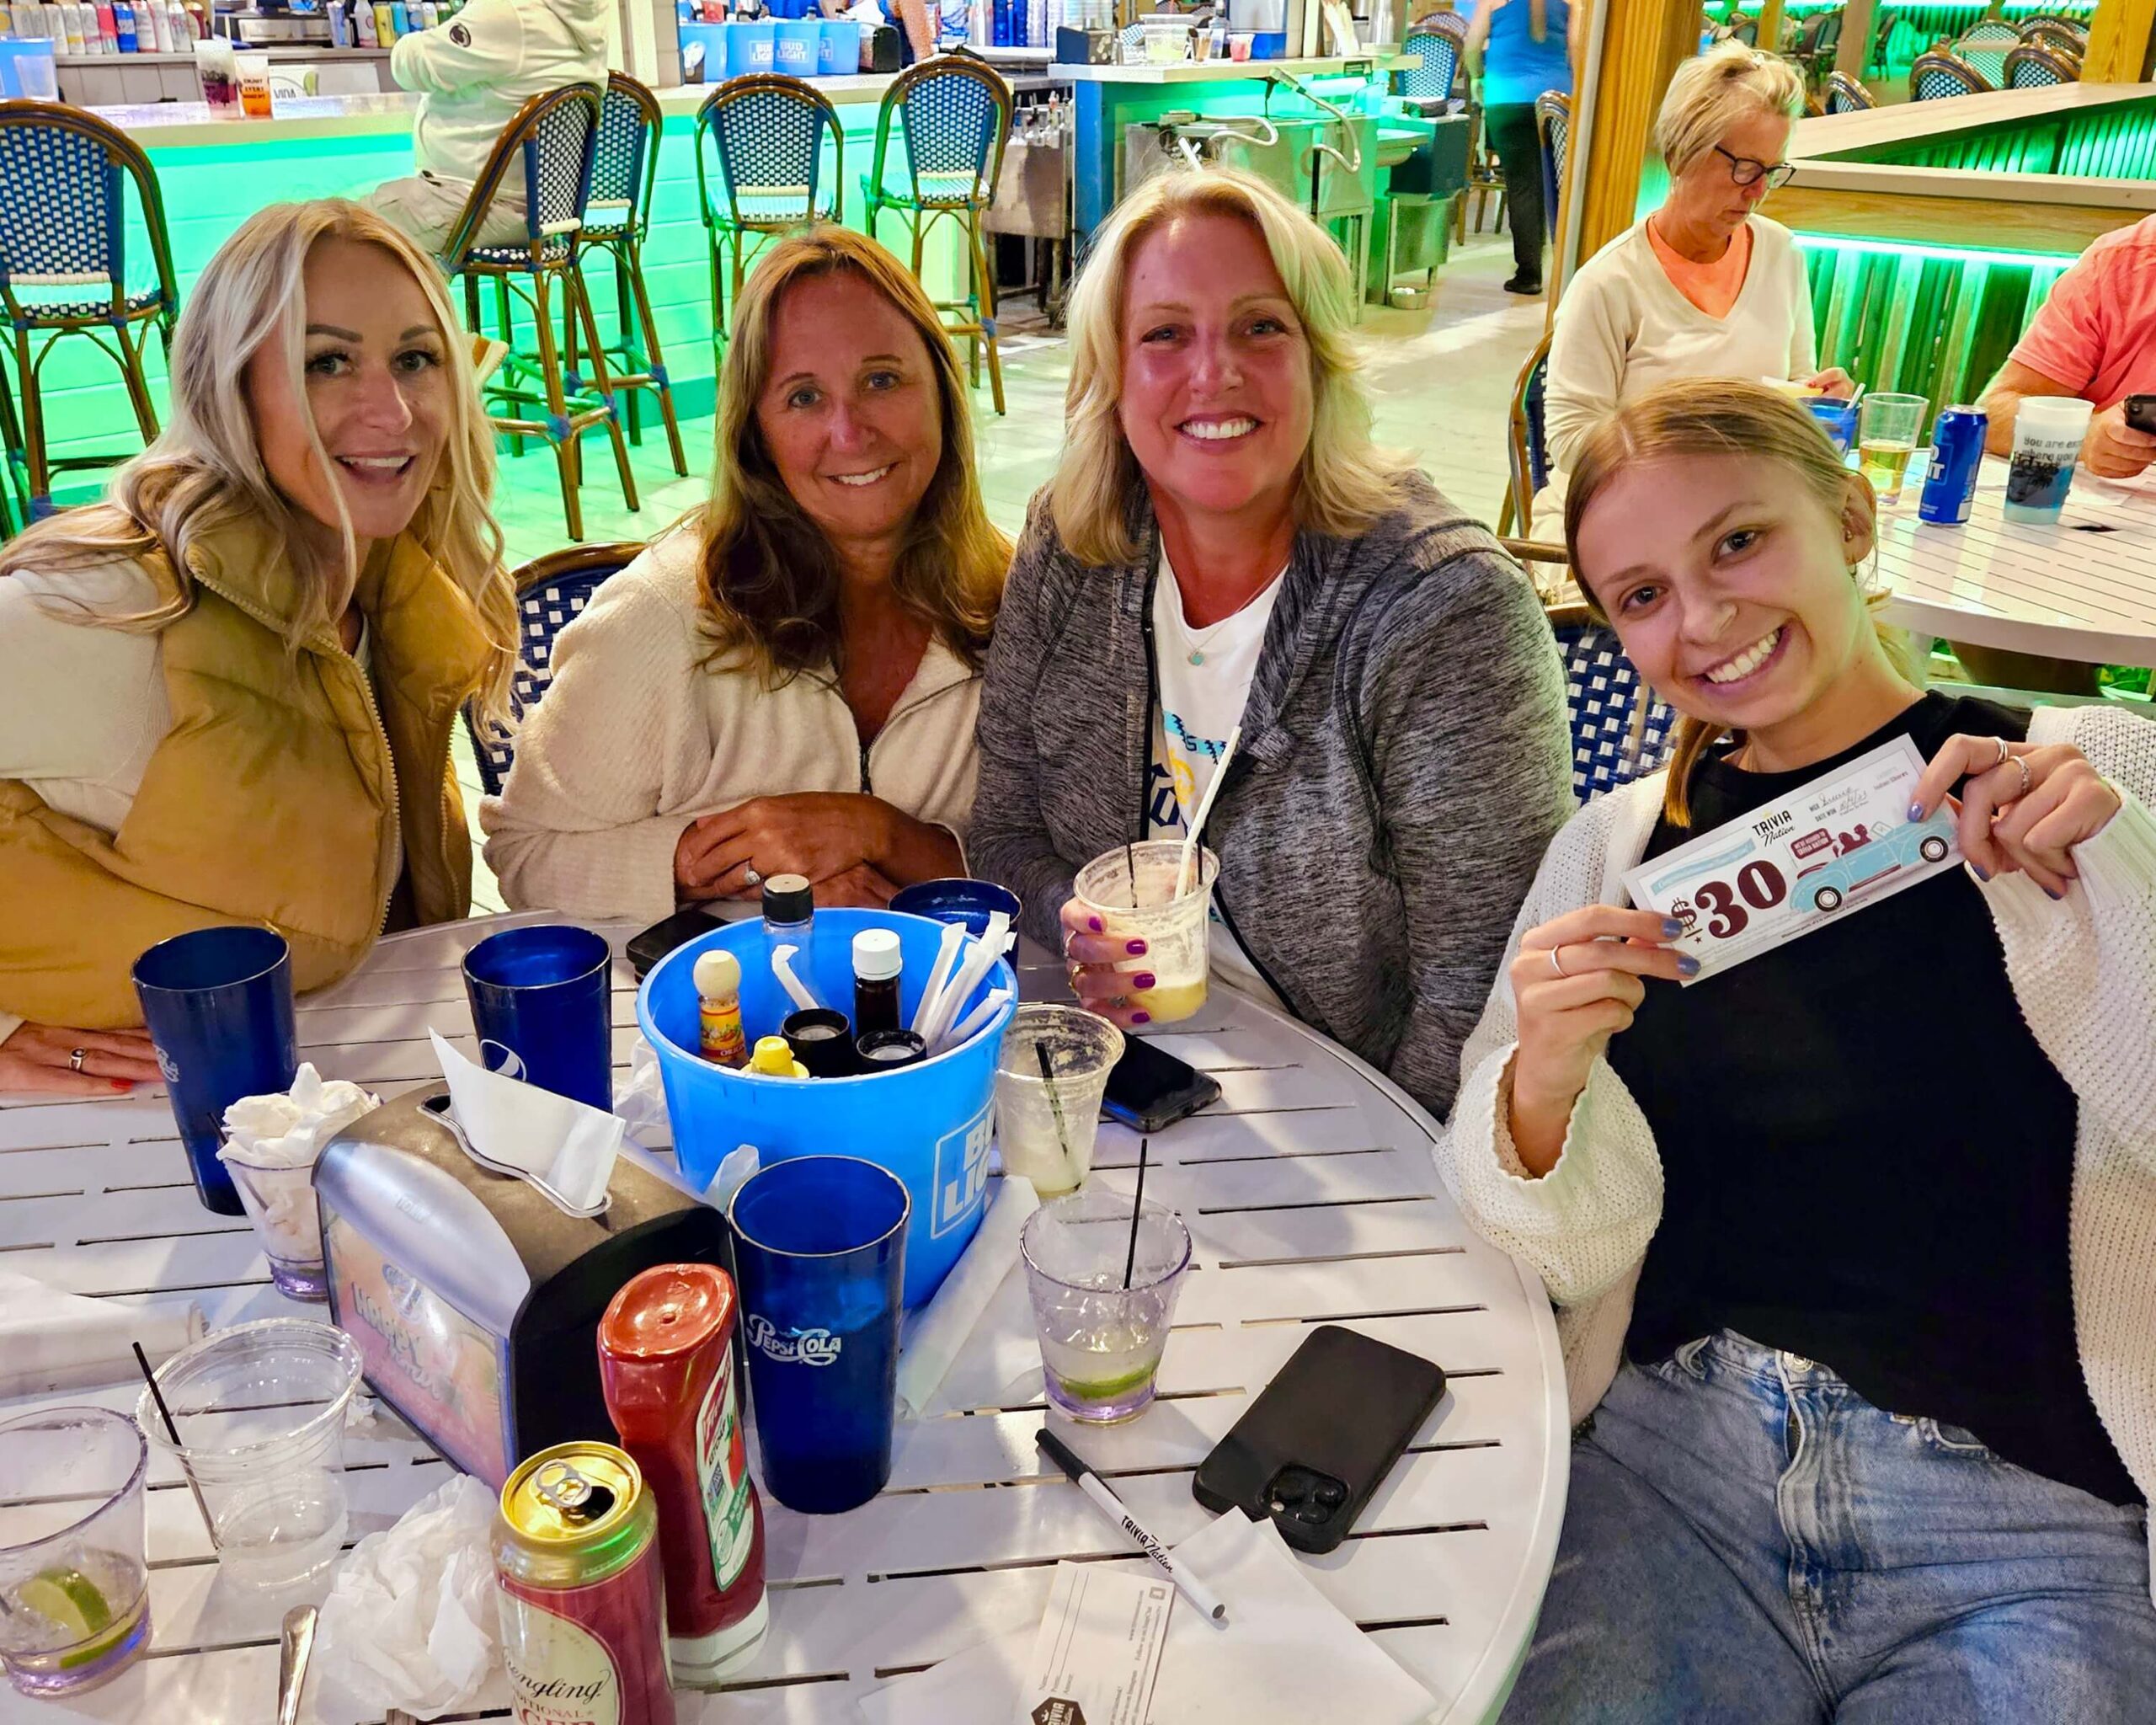 Caddy's Bradenton FL 34208 trivia night: close-up of four women seated around a table on a patio all smiling with drinks on the table and in their hands while the young woman on the right holds up a $30 music bingo coupon